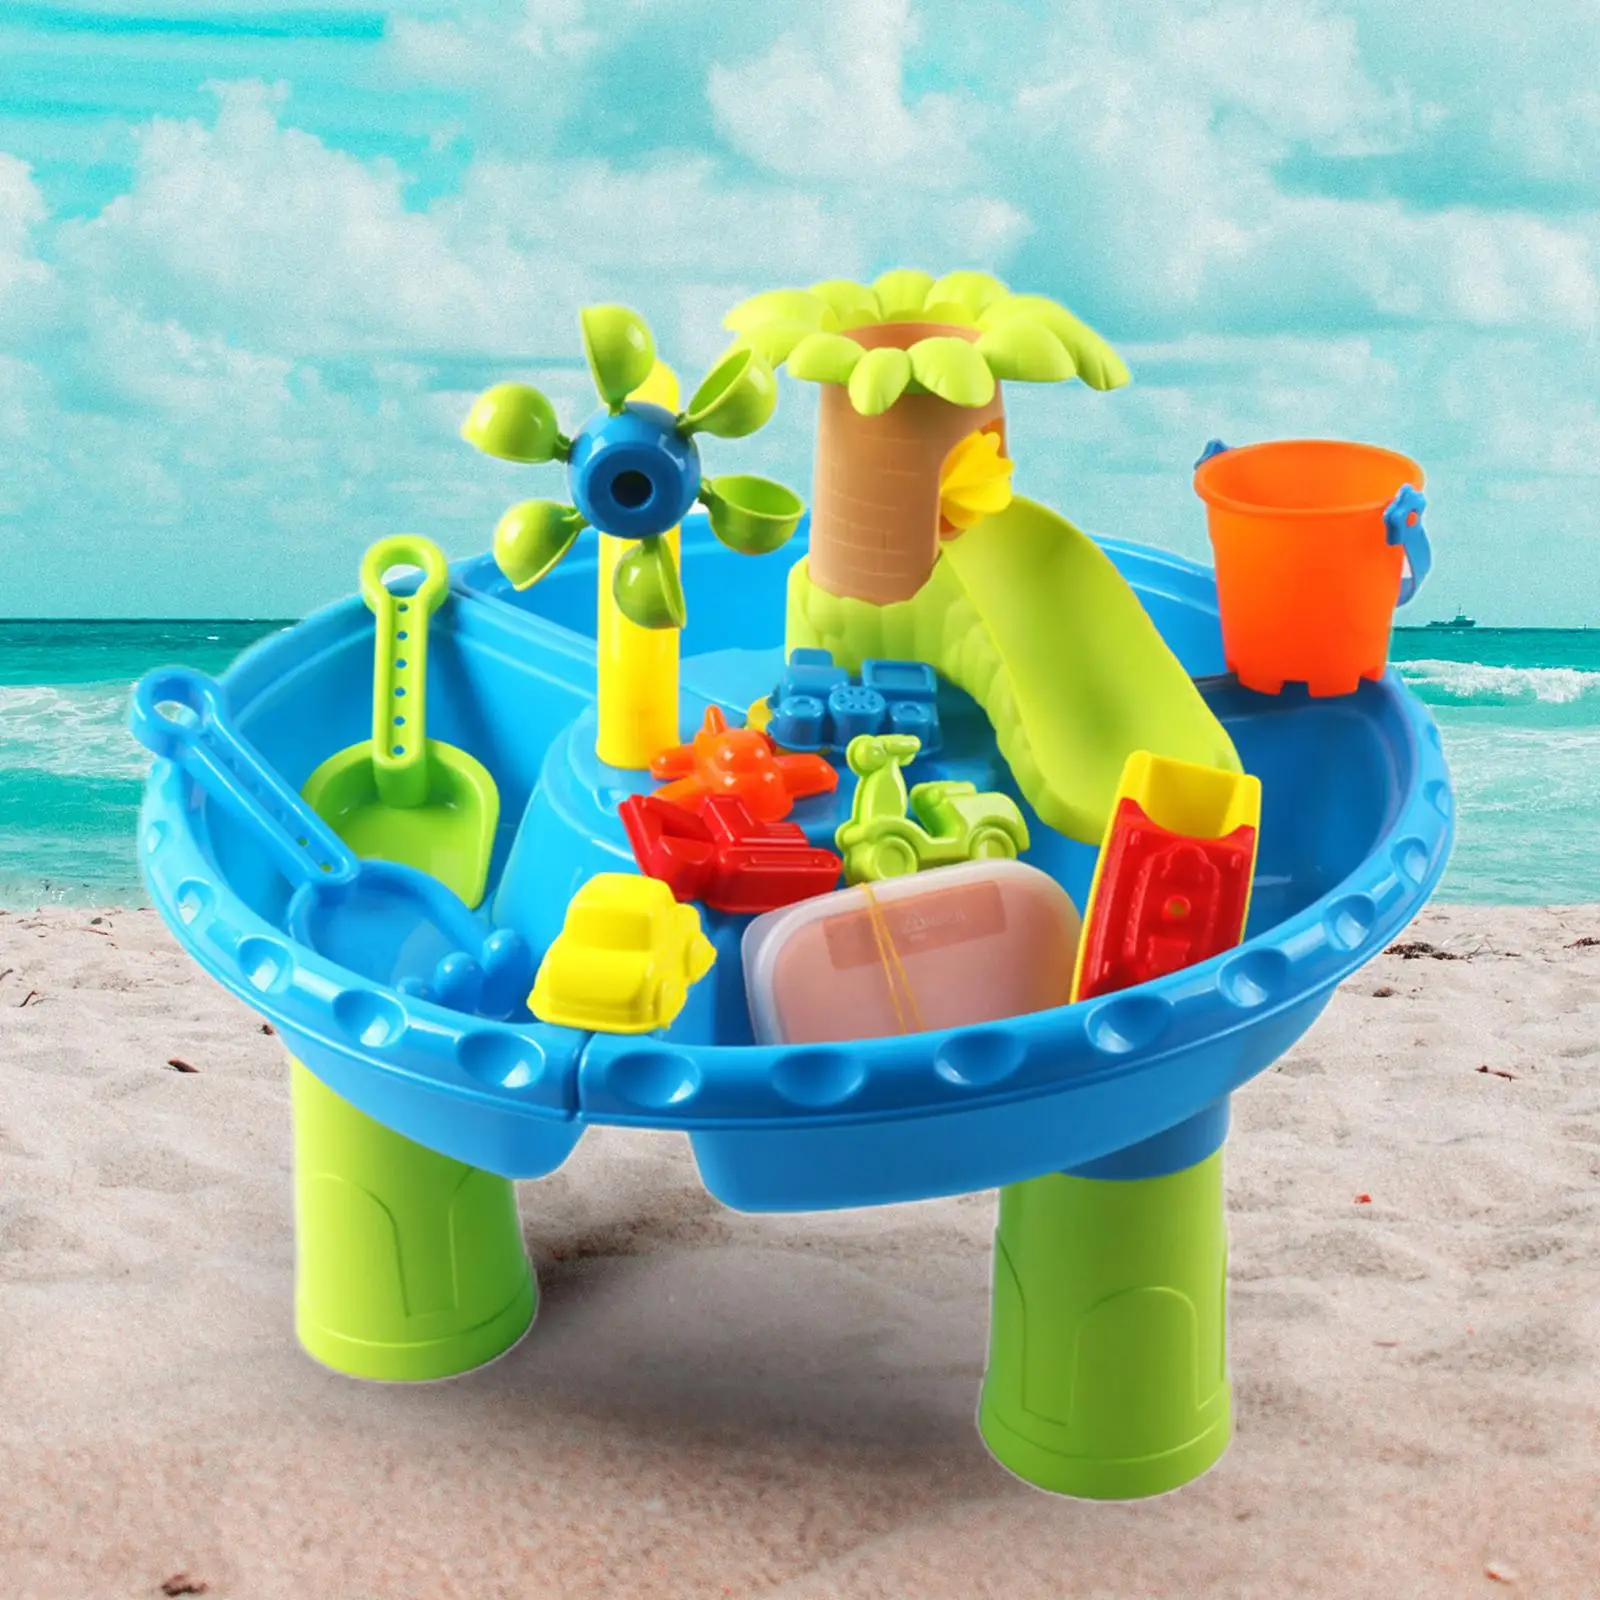  Kids Sand And Water Table - Beach Play Activity Table for Toddlers Sensory Table Beach Toys for Kids Play Sand Table